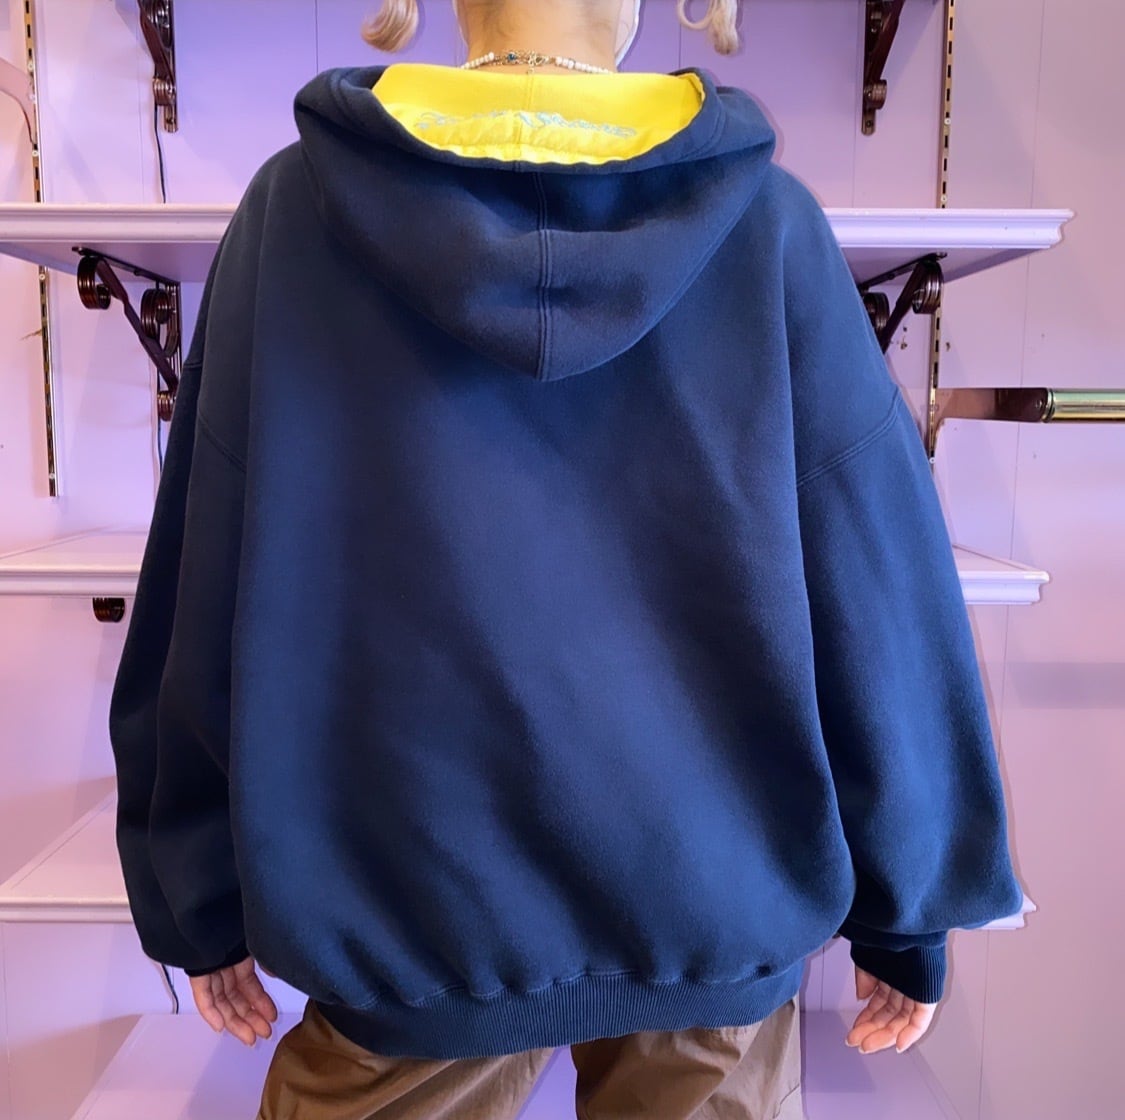 jnco jeans design hoodie デザインパーカー